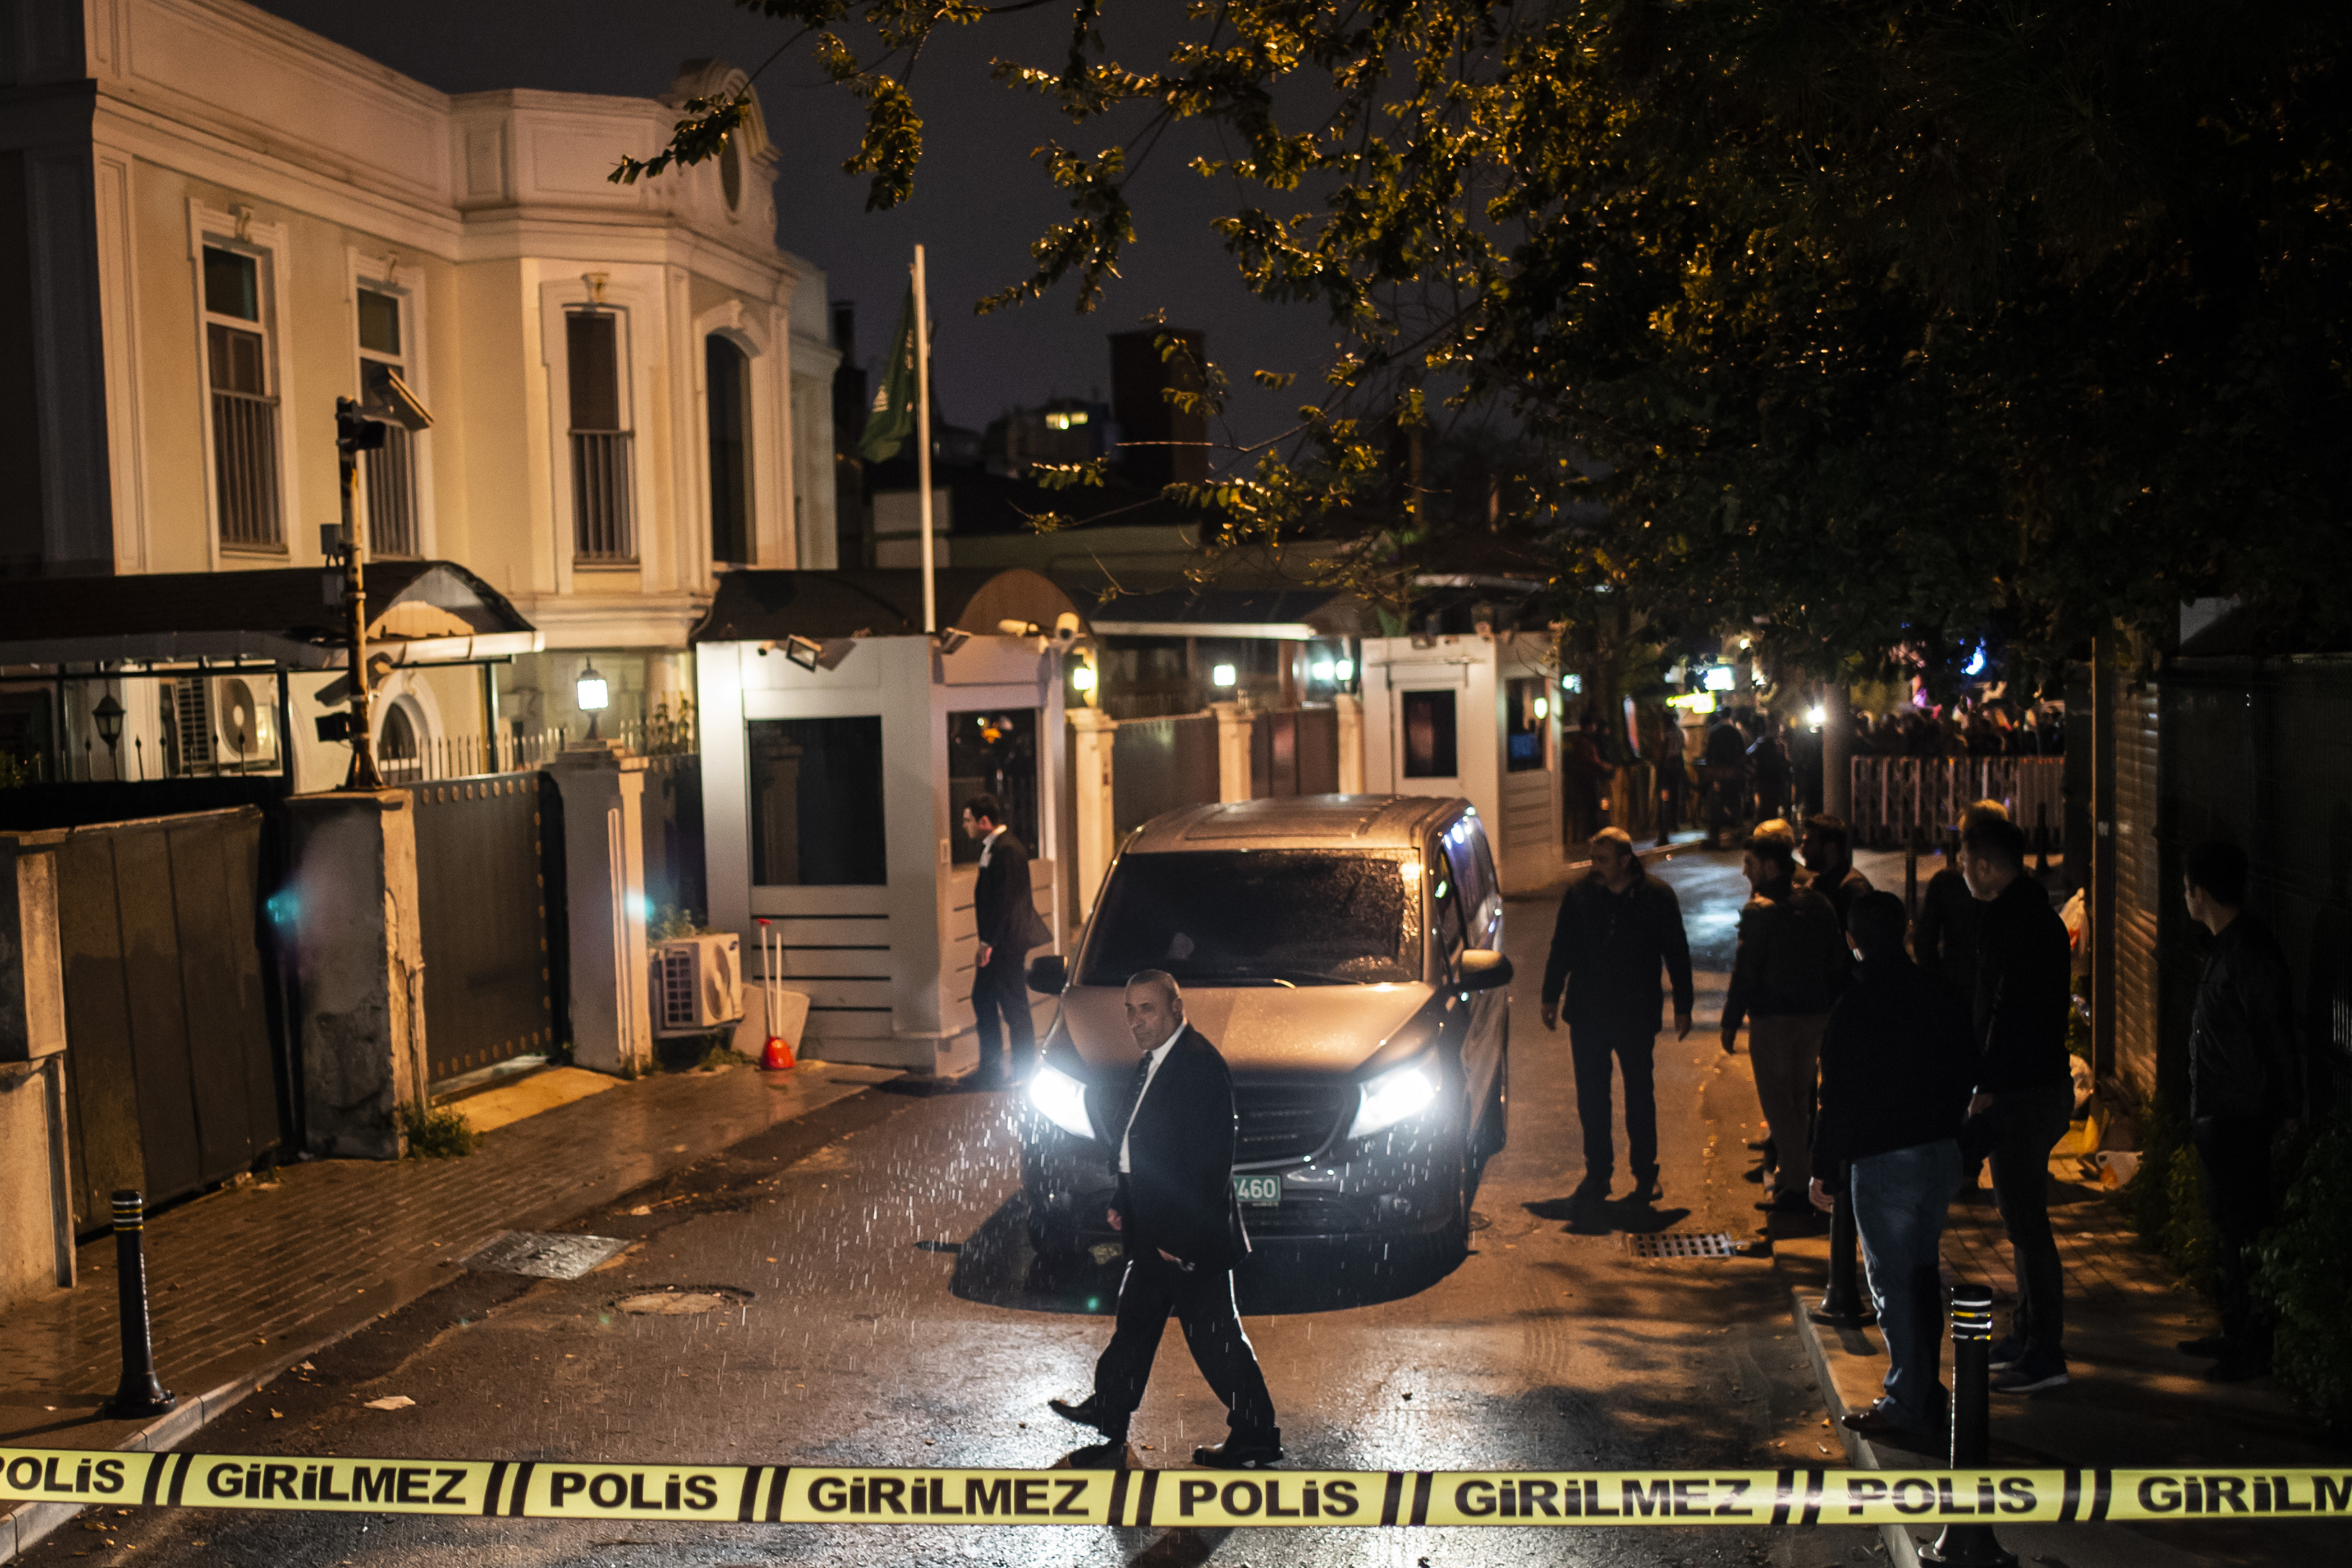 Turkish forensic police officers arrive for investigation at the residence of the Saudi consul in Istanbul on Tuesday.